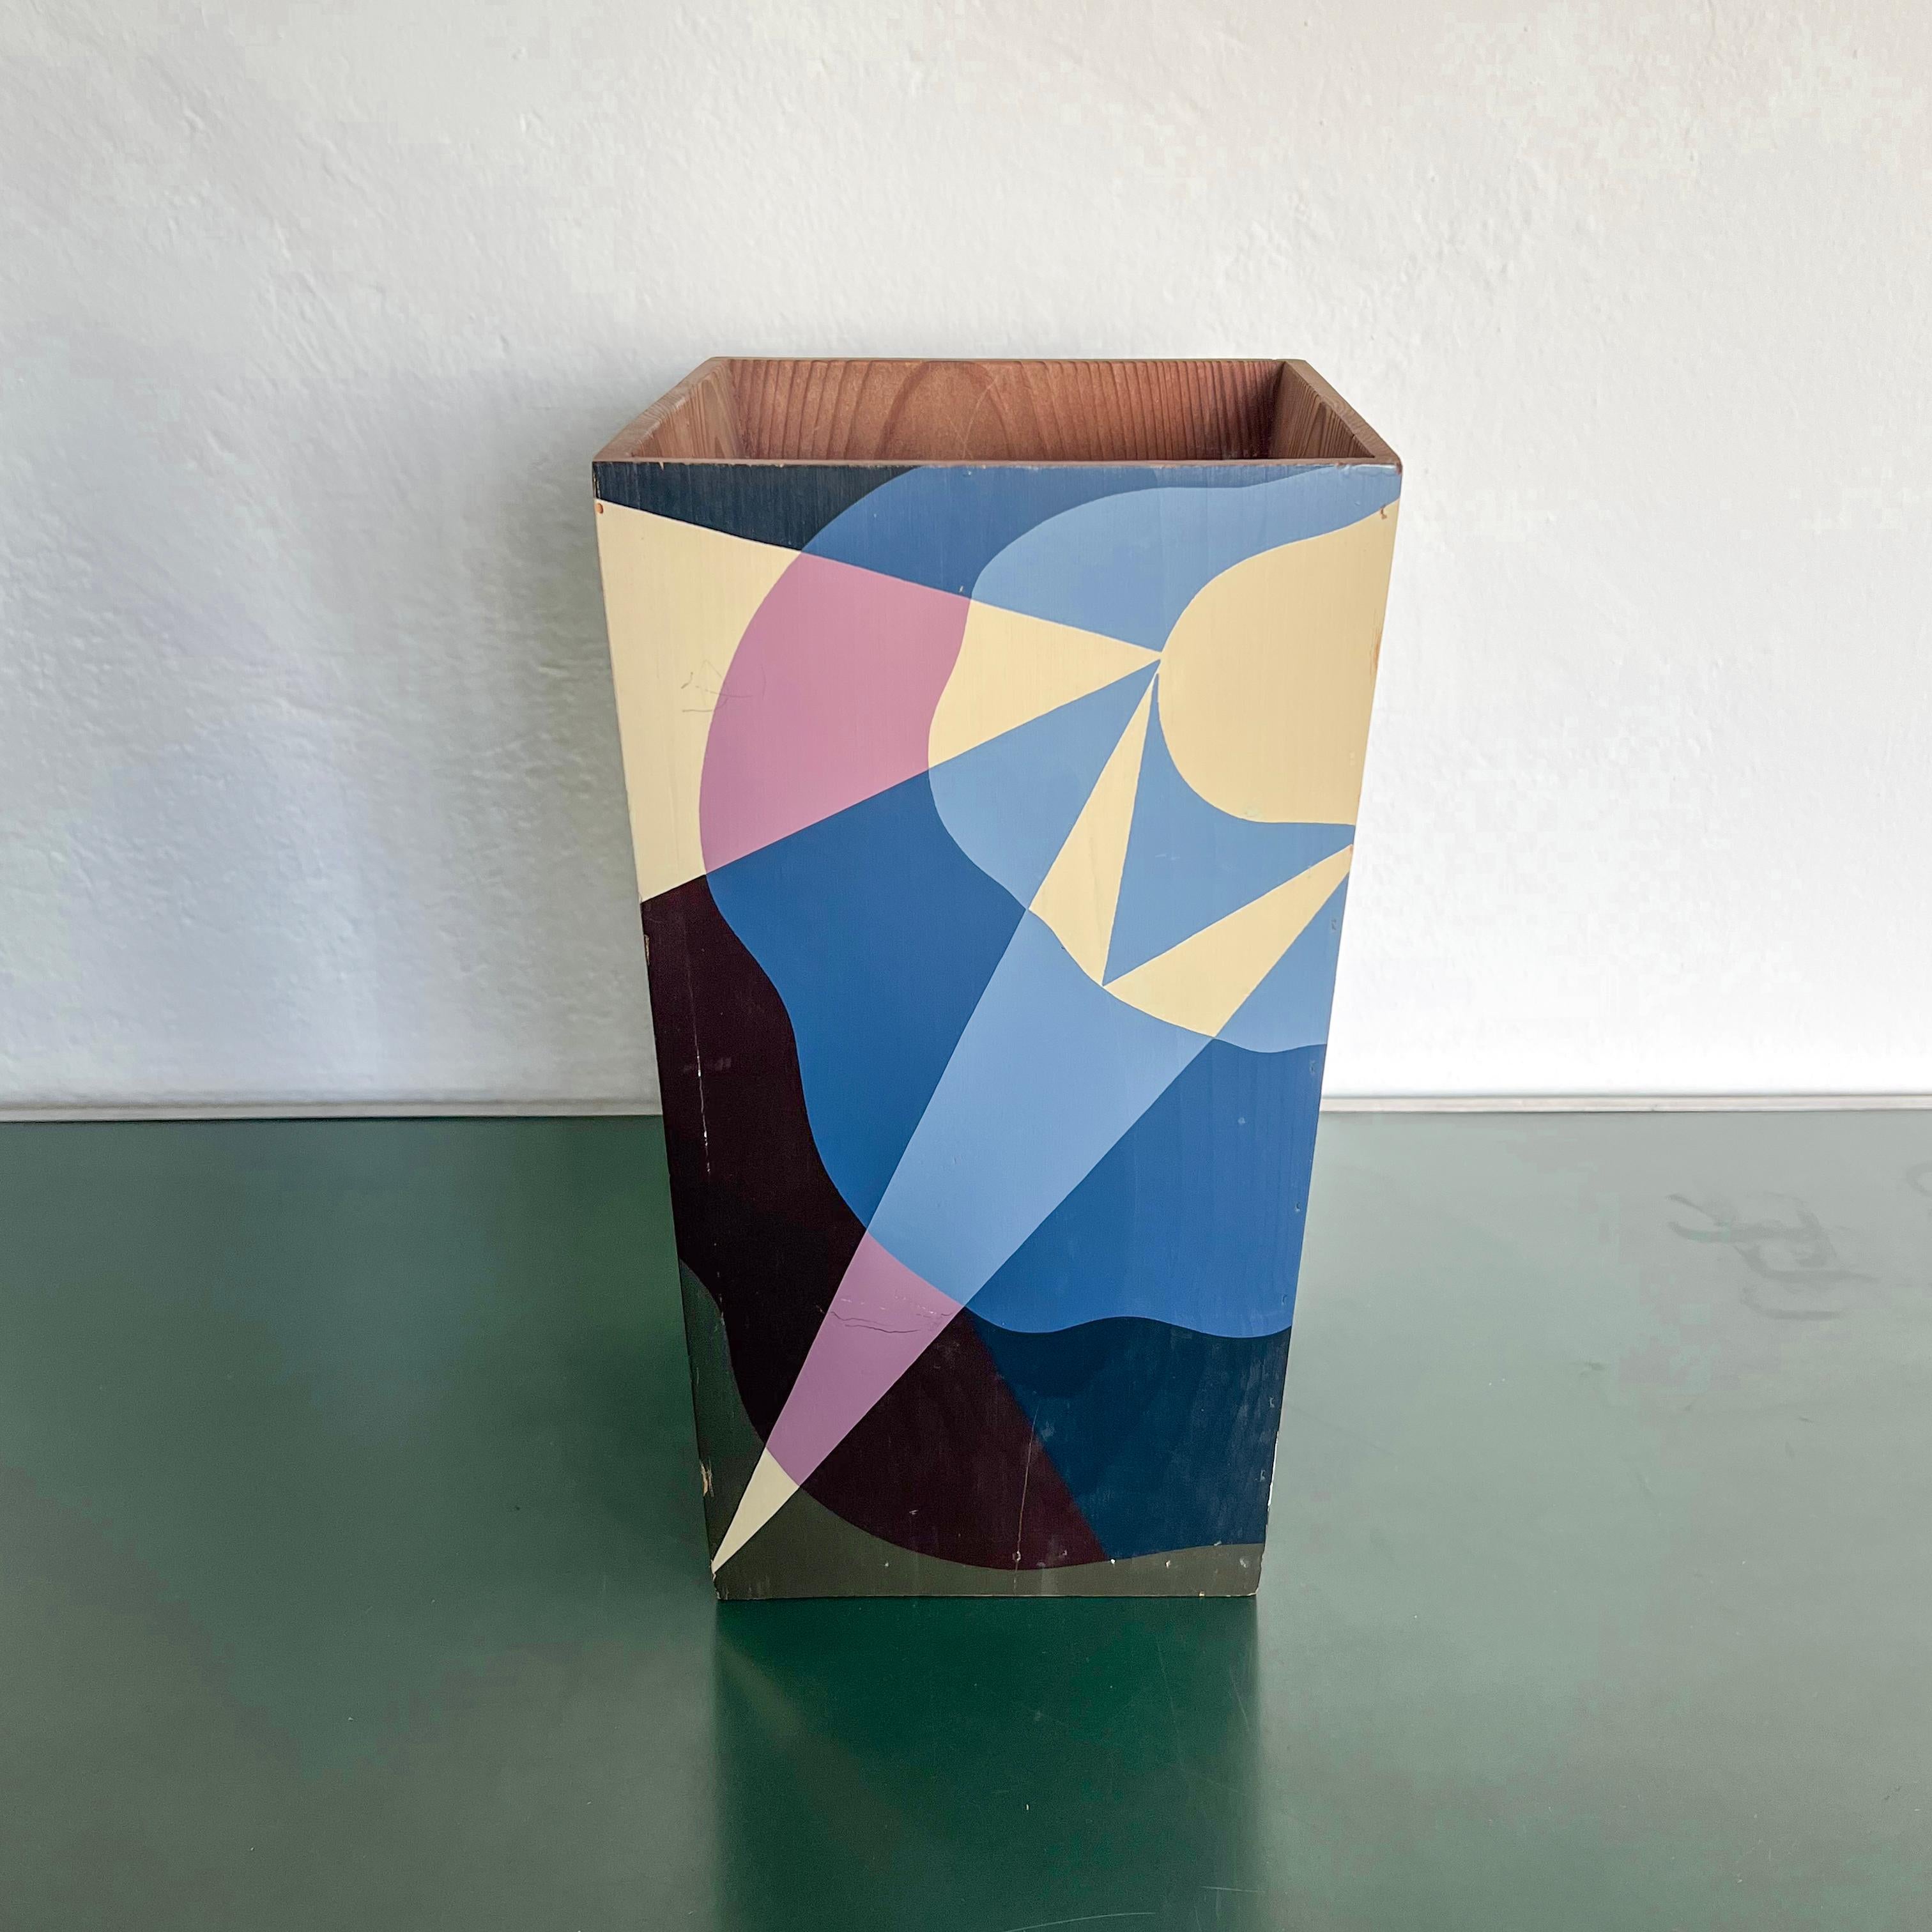 This is a rare decorative vase in wood, made in Italy in the 1990s by a 